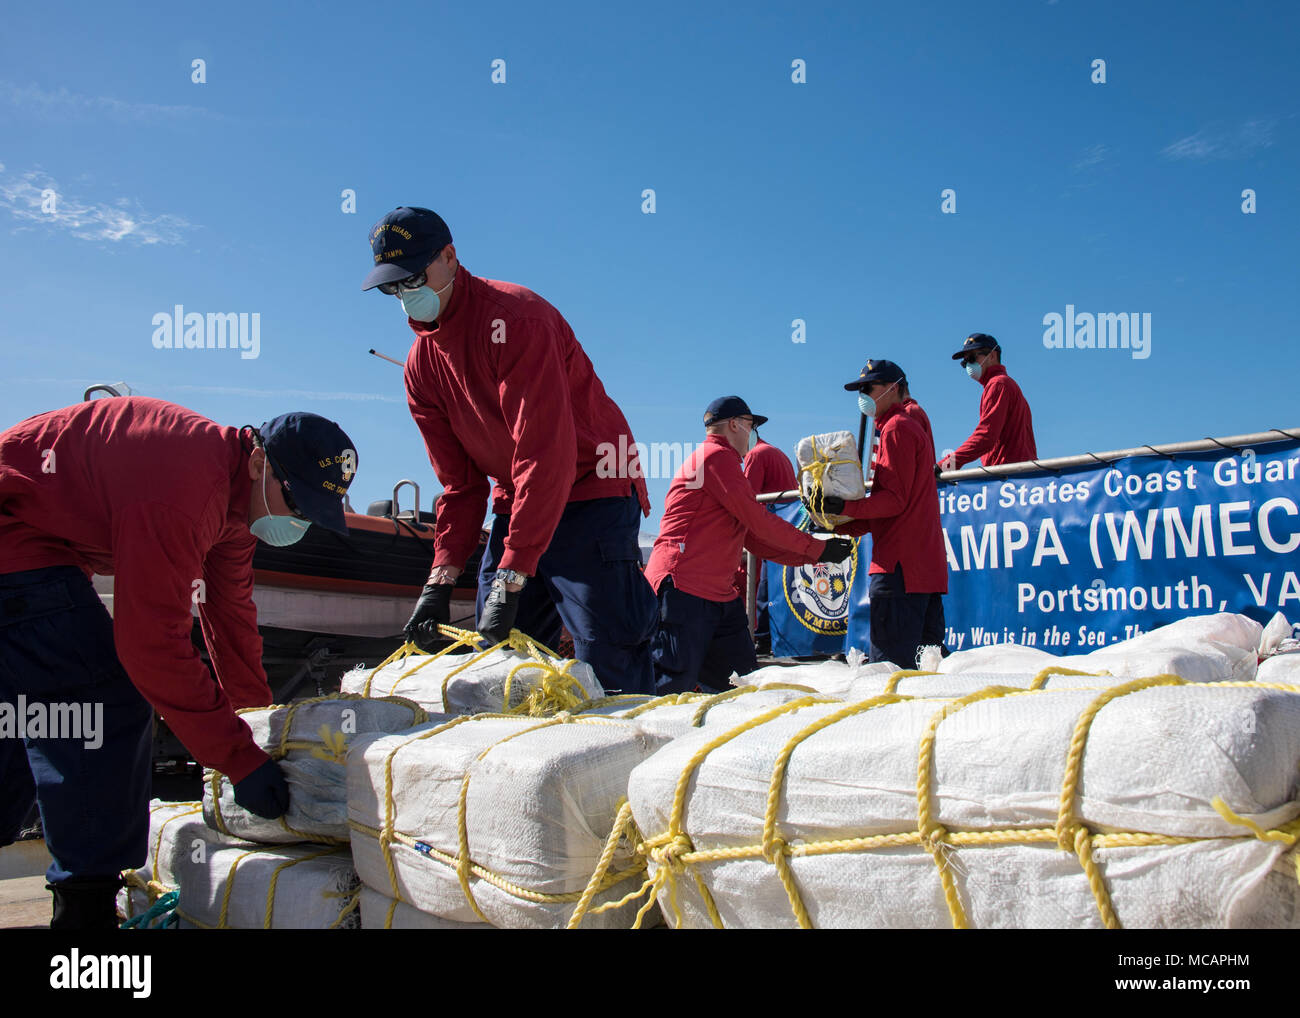 The crew of the Coast Guard Cutter Tampa, a 270-foot Medium Endurance Cutter based out of  Portsmouth, Va., offloads nearly two tons of cocaine Friday, Feb. 2, 2018, in St. Petersburg, Florida. While patrolling the Caribbean Sea in support of Operation Unified Resolve and Operation Martillo, approximately 1,580 kgs of cocaine were seized by the U.S. Coast Guard and partner nation crews between Dec. 20-22, 2017. (U.S. Coast Guard photo by Petty Officer 1st Class Michael De Nyse) Stock Photo